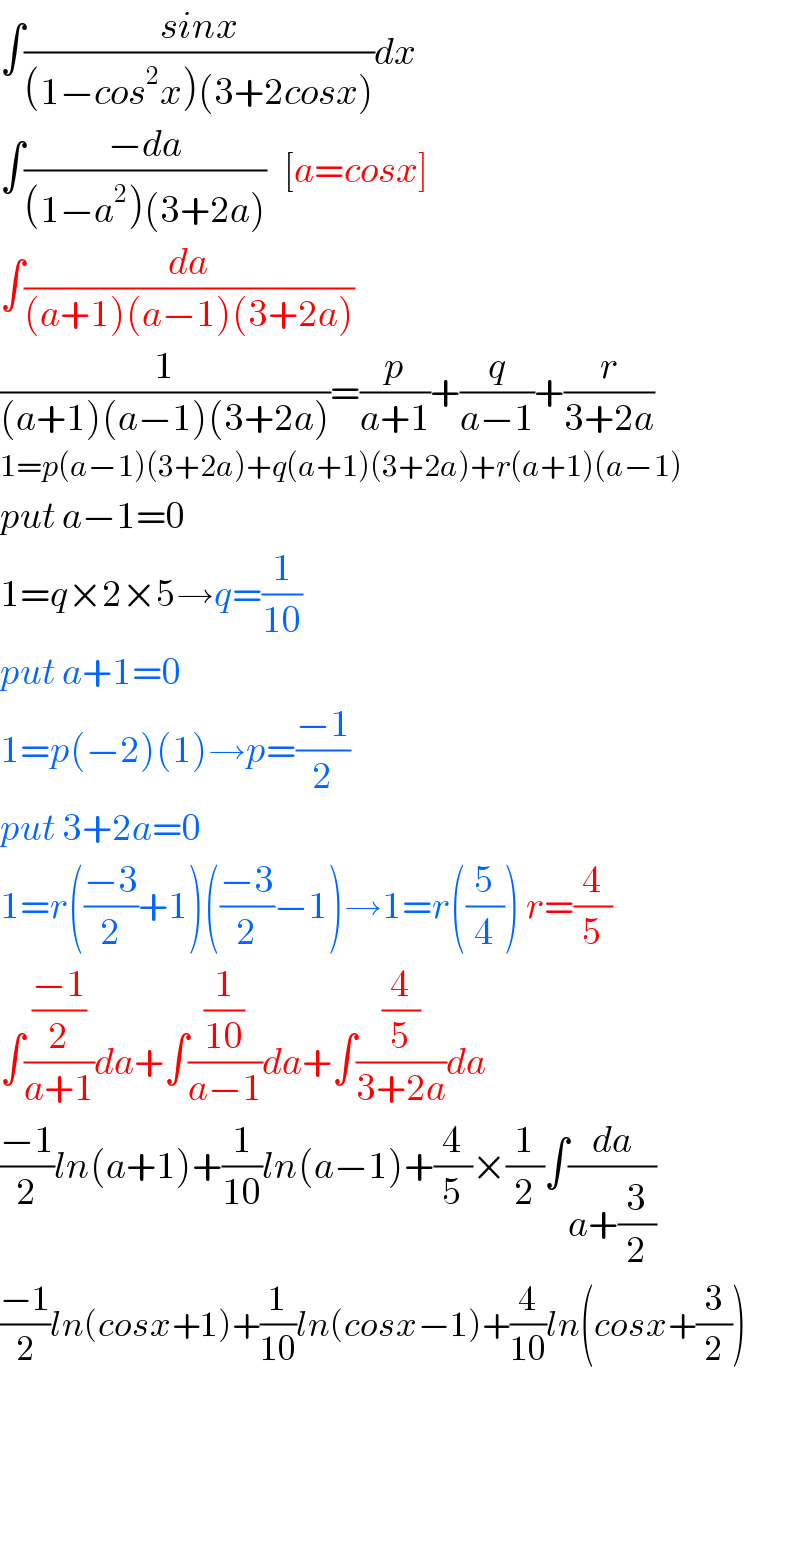 ∫((sinx)/((1−cos^2 x)(3+2cosx)))dx  ∫((−da)/((1−a^2 )(3+2a)))   [a=cosx]  ∫(da/((a+1)(a−1)(3+2a)))  (1/((a+1)(a−1)(3+2a)))=(p/(a+1))+(q/(a−1))+(r/(3+2a))  1=p(a−1)(3+2a)+q(a+1)(3+2a)+r(a+1)(a−1)  put a−1=0    1=q×2×5→q=(1/(10))  put a+1=0  1=p(−2)(1)→p=((−1)/2)  put 3+2a=0  1=r(((−3)/2)+1)(((−3)/2)−1)→1=r((5/4)) r=(4/5)  ∫(((−1)/2)/(a+1))da+∫((1/(10))/(a−1))da+∫((4/5)/(3+2a))da  ((−1)/2)ln(a+1)+(1/(10))ln(a−1)+(4/5)×(1/2)∫(da/(a+(3/2)))  ((−1)/2)ln(cosx+1)+(1/(10))ln(cosx−1)+(4/(10))ln(cosx+(3/2))        